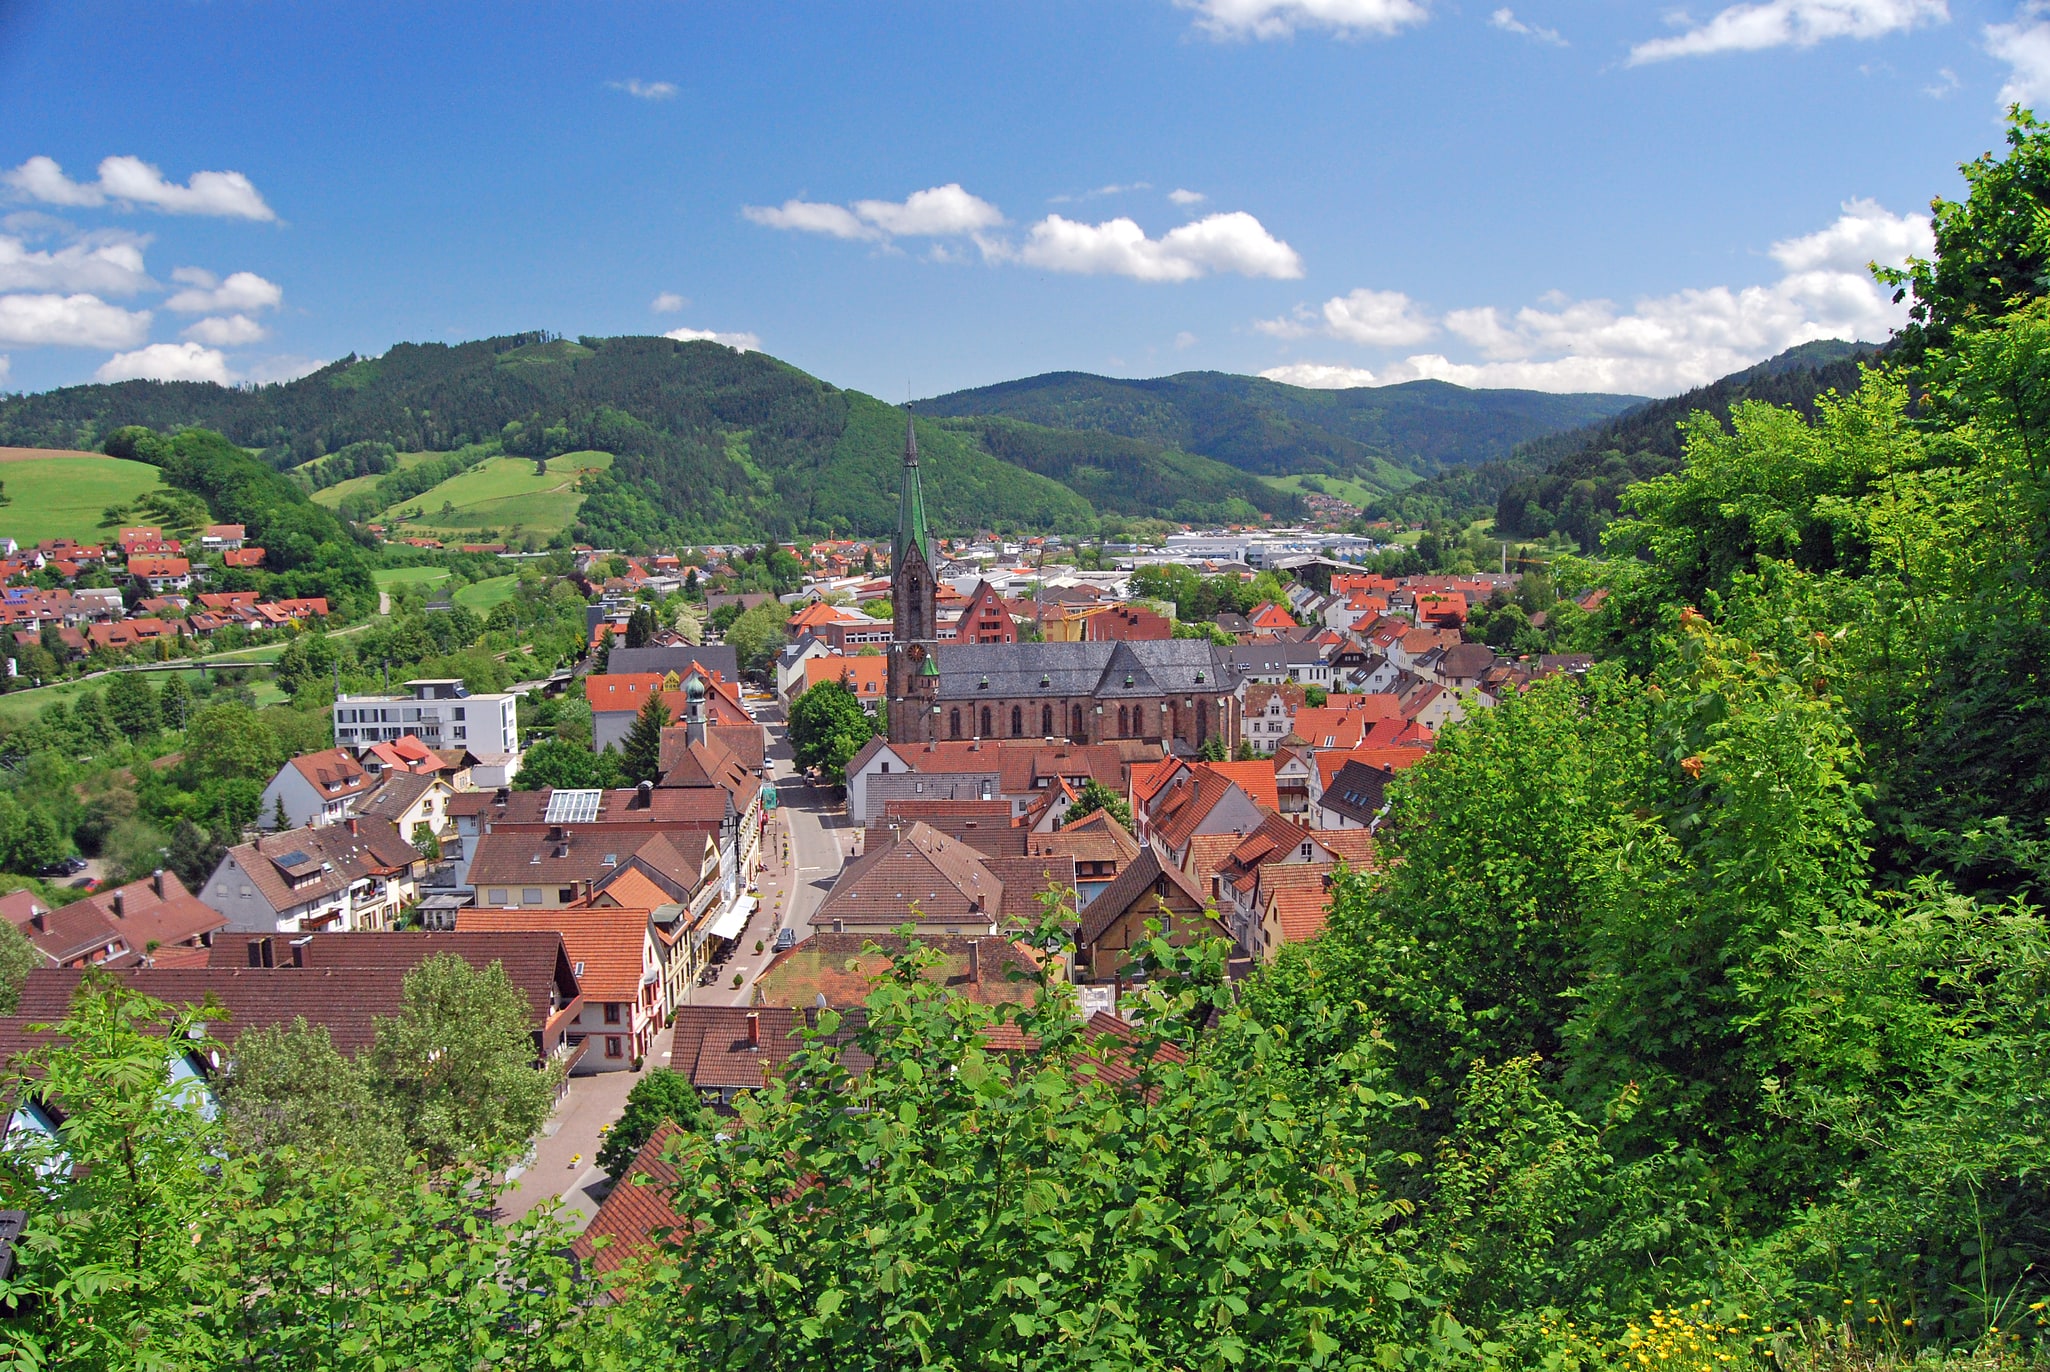 Hausach, Germany